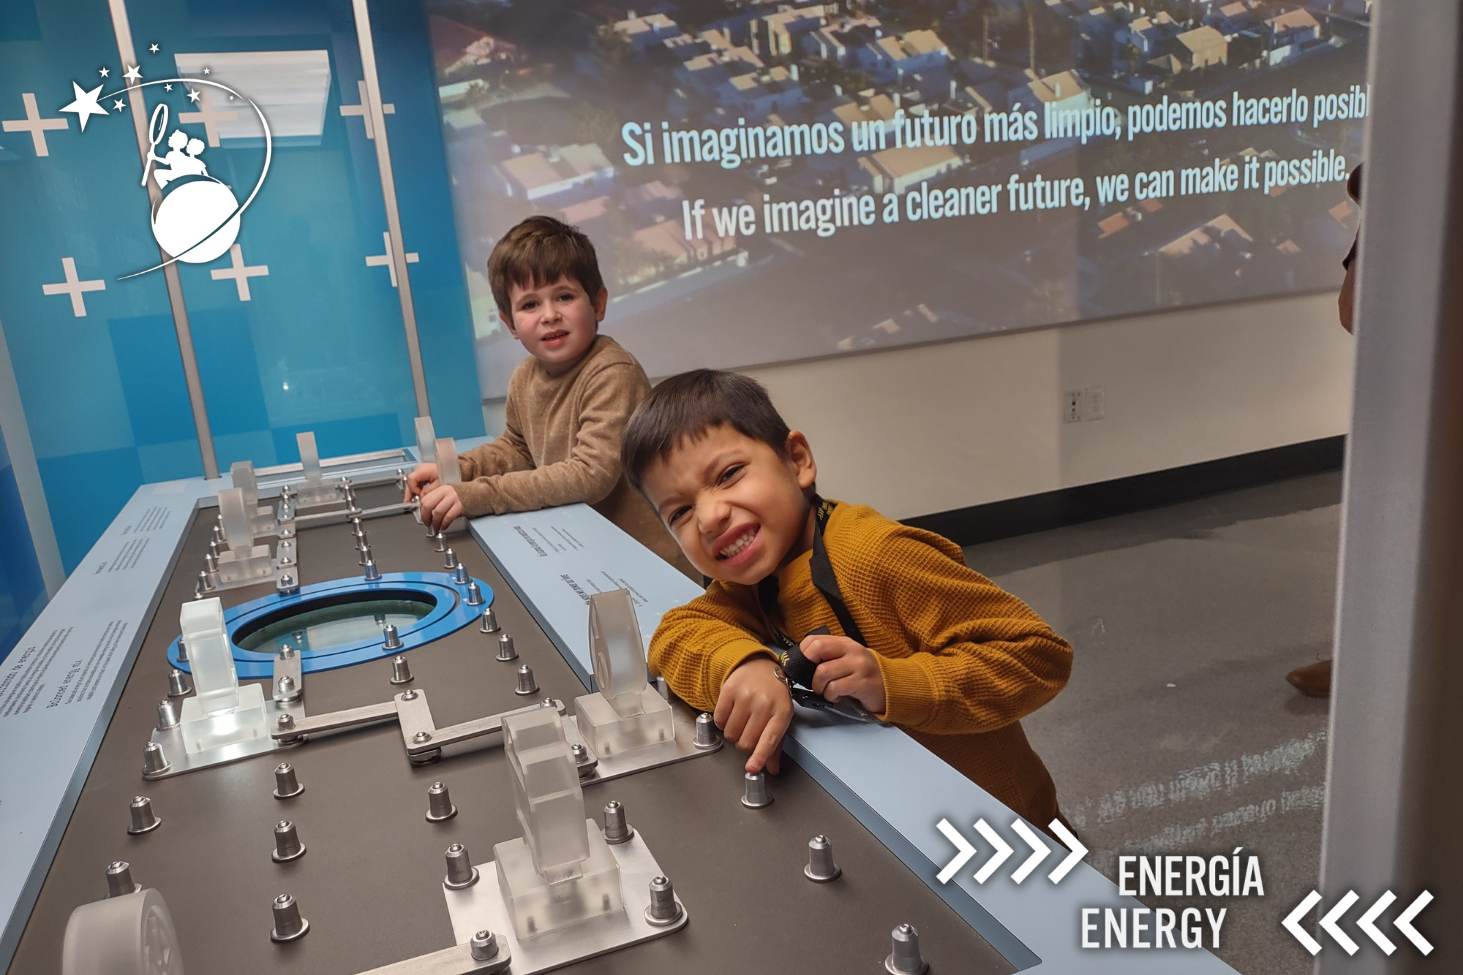 2 young boys playing with knobs on an energy exhibit at the Discovery Children's Museum